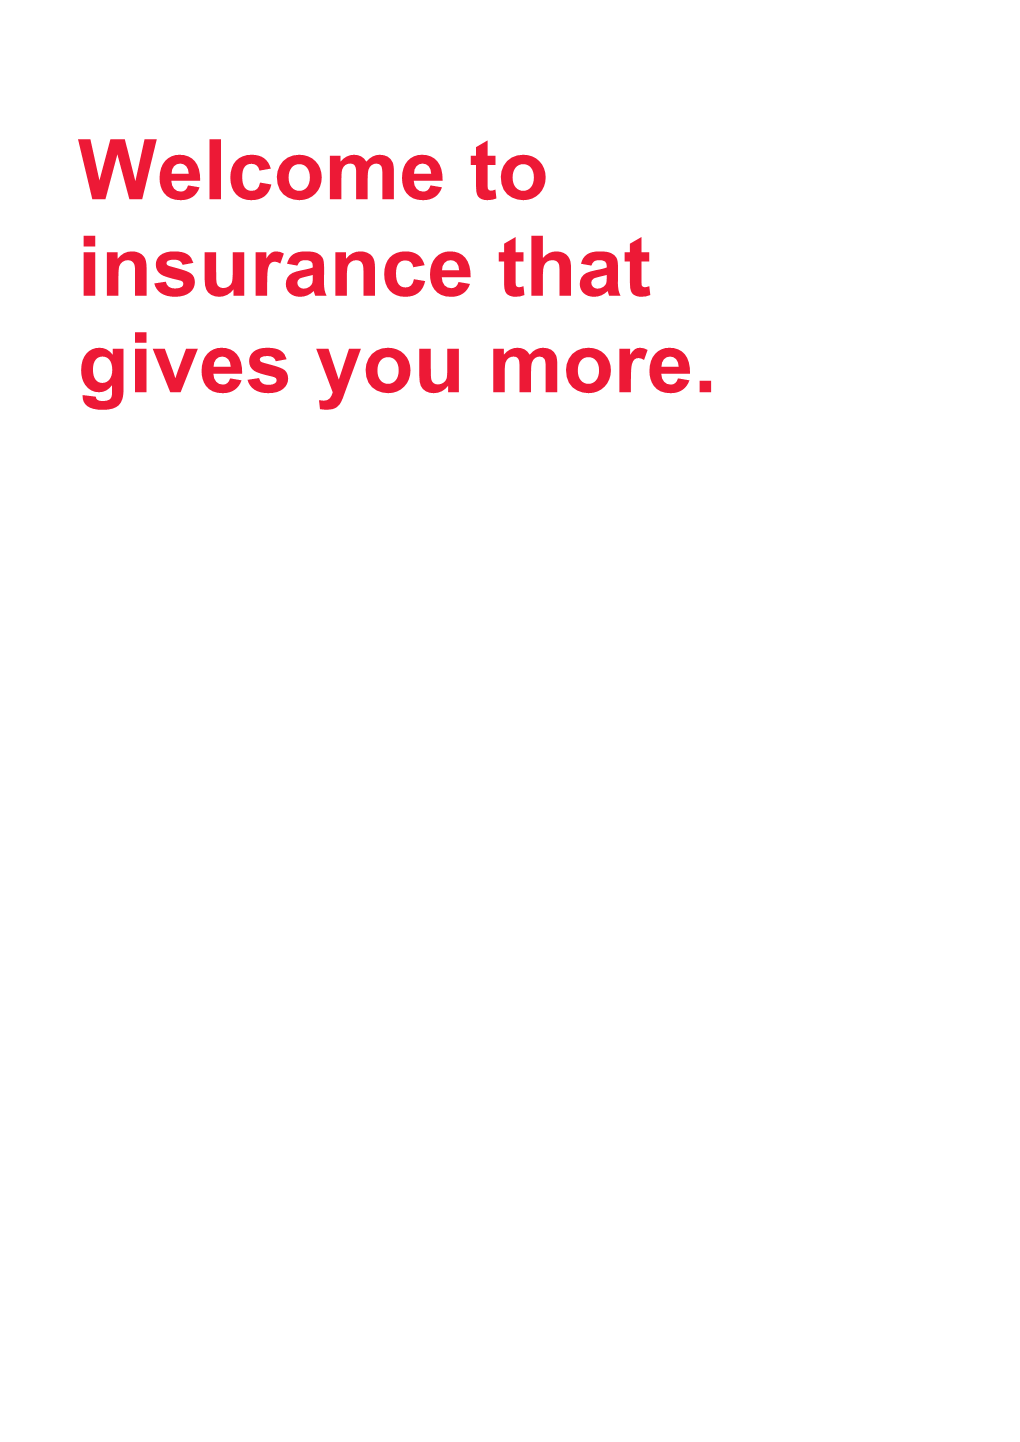 Welcome to Insurance That Gives You More. Benefits